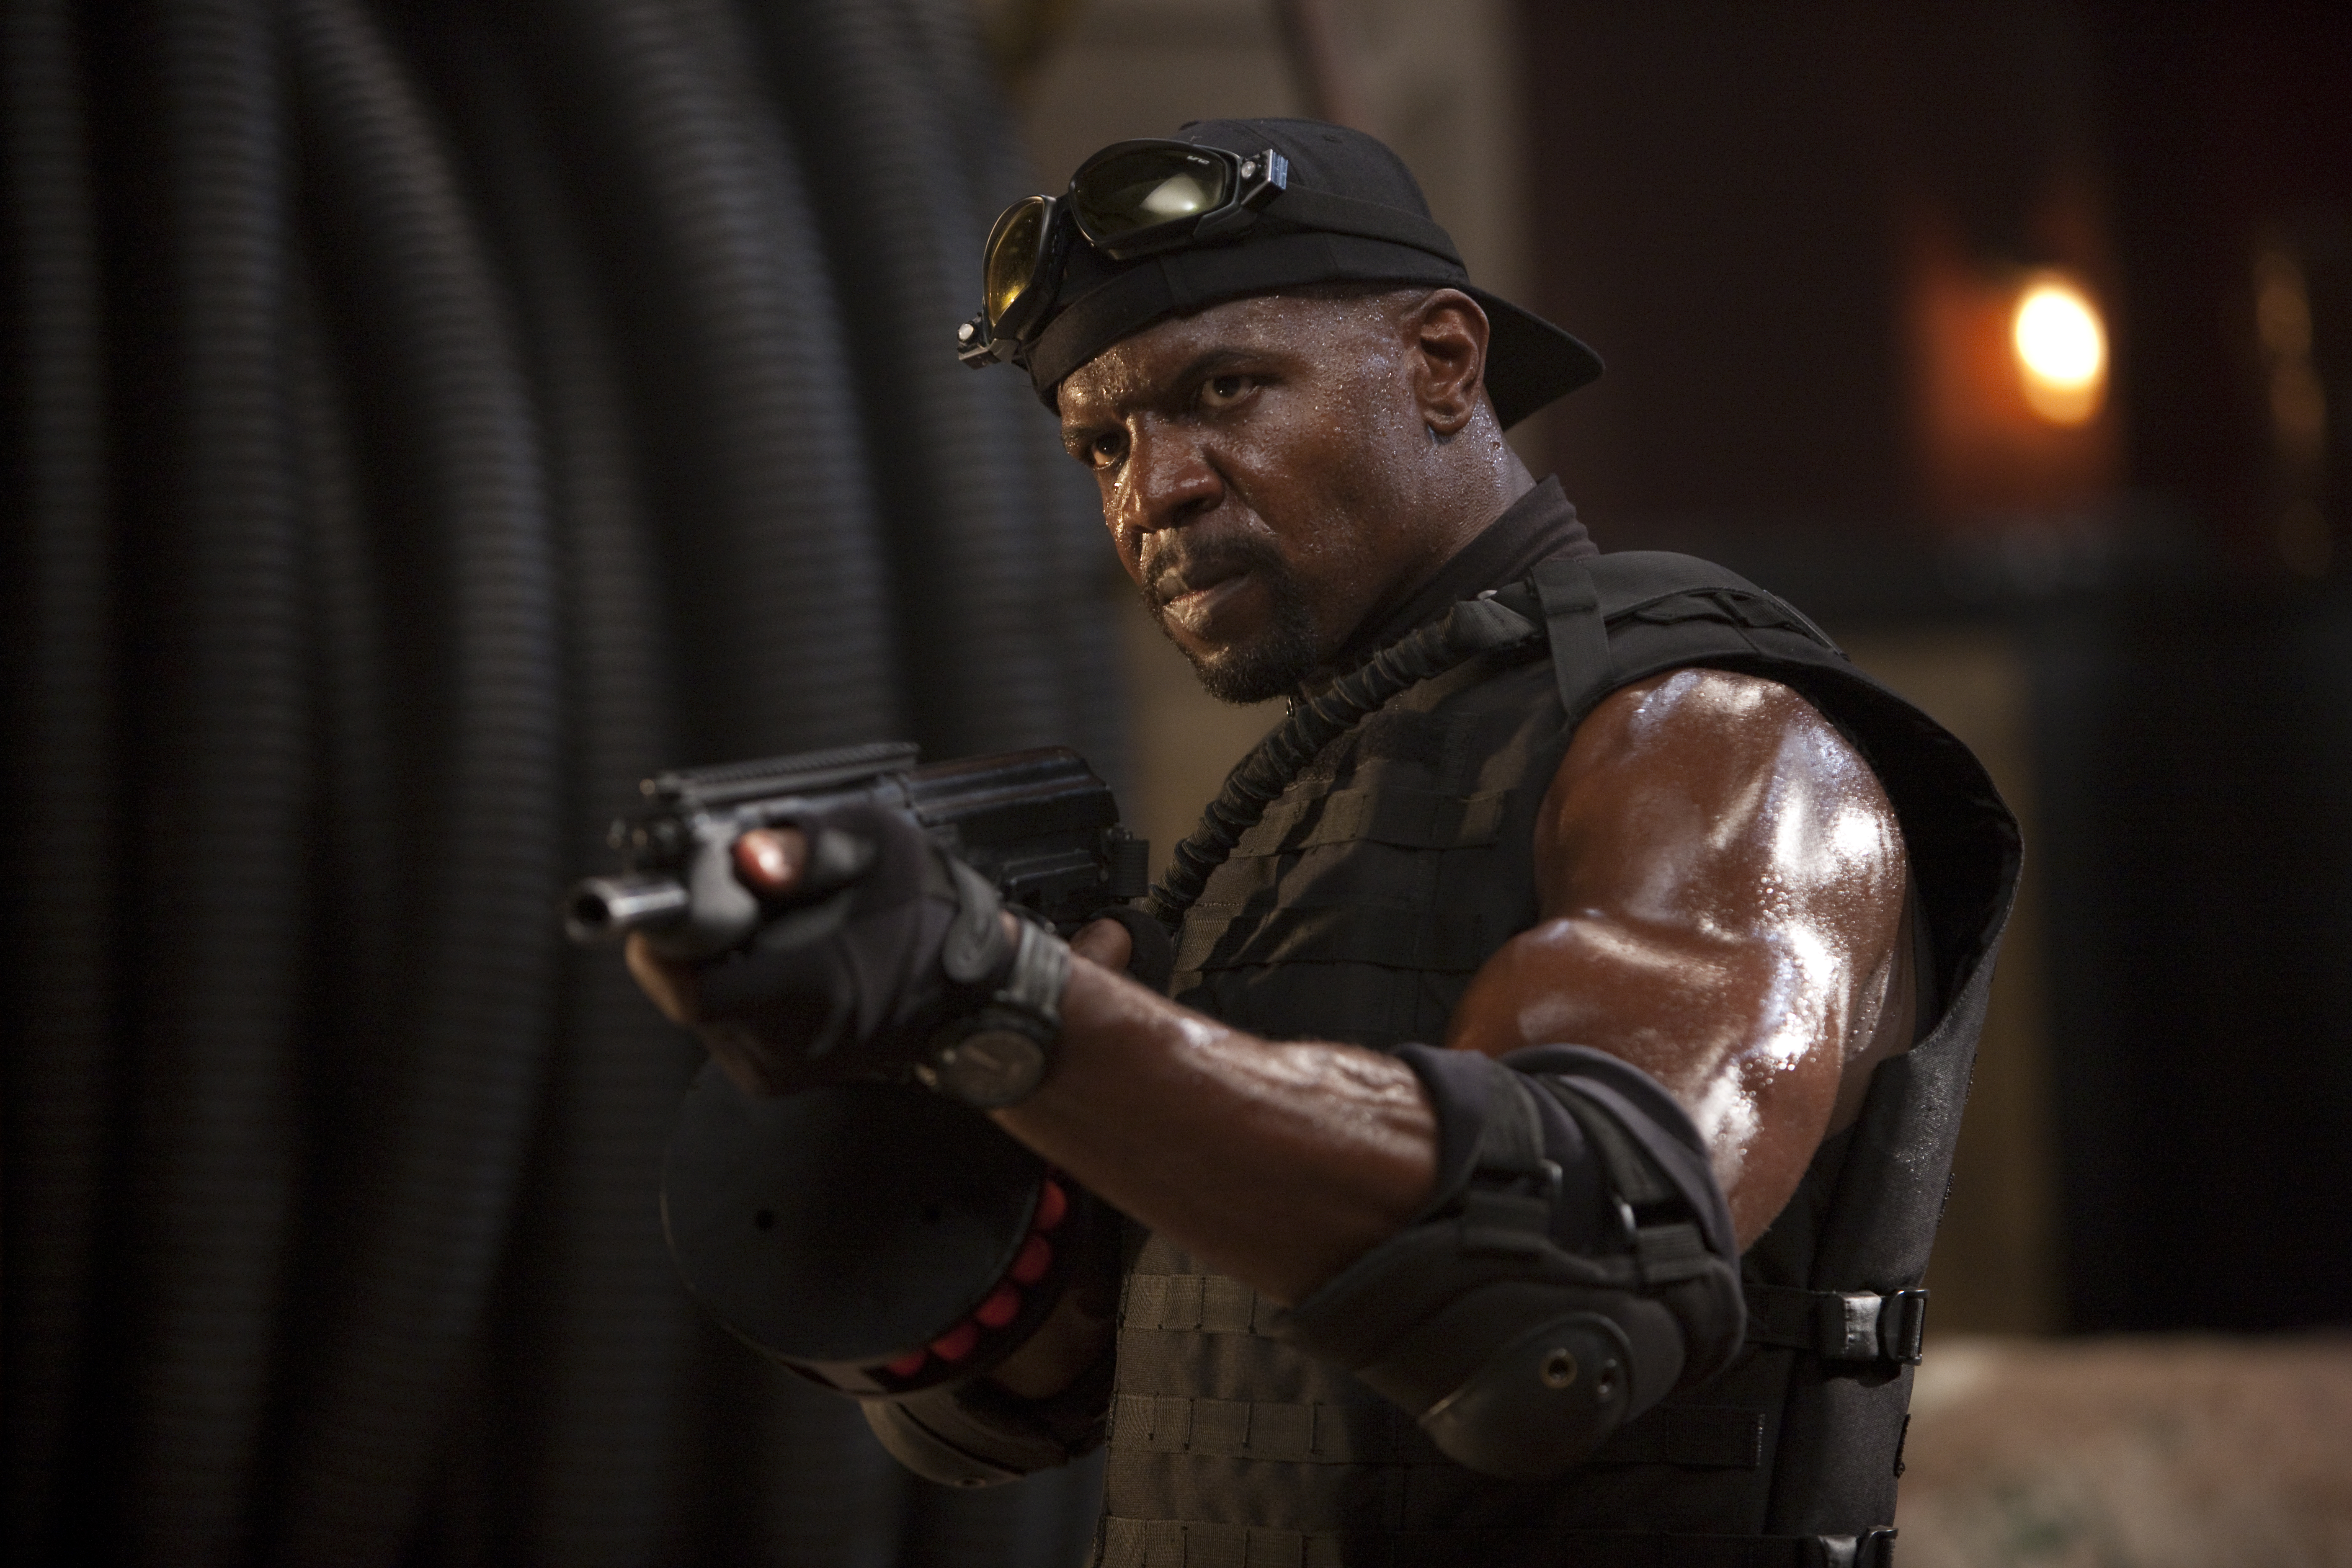 The Expendables Hale Caesar Terry Crews 5616x3744